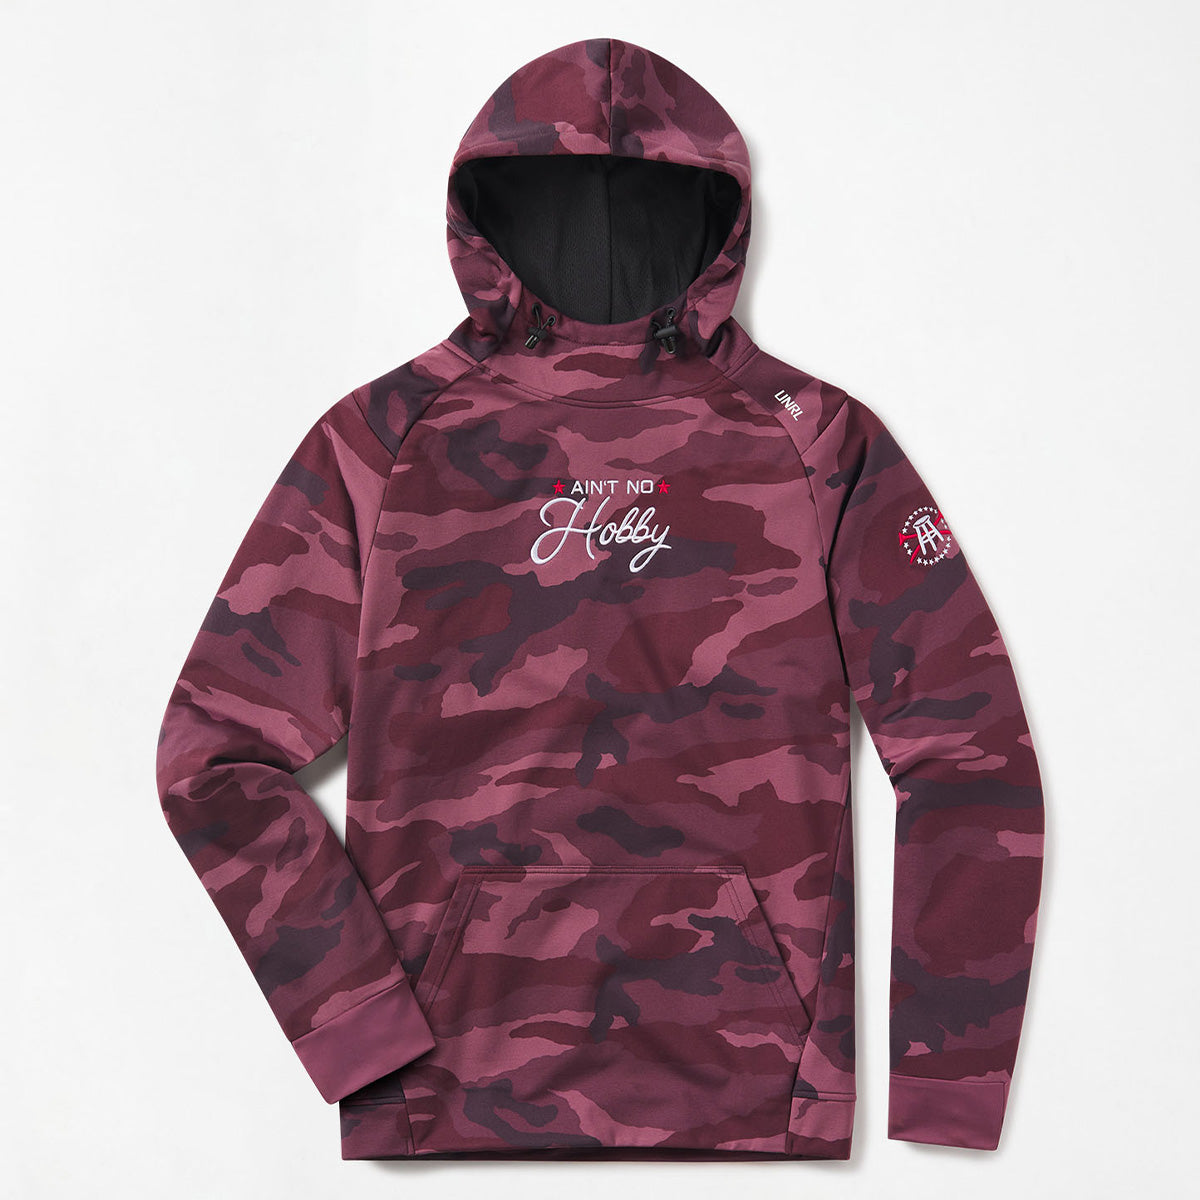 UNRL x Ain't No Hobby Script Camo Crossover Hoodie II-Hoodies & Sweatshirts-Fore Play-Red-S-Barstool Sports